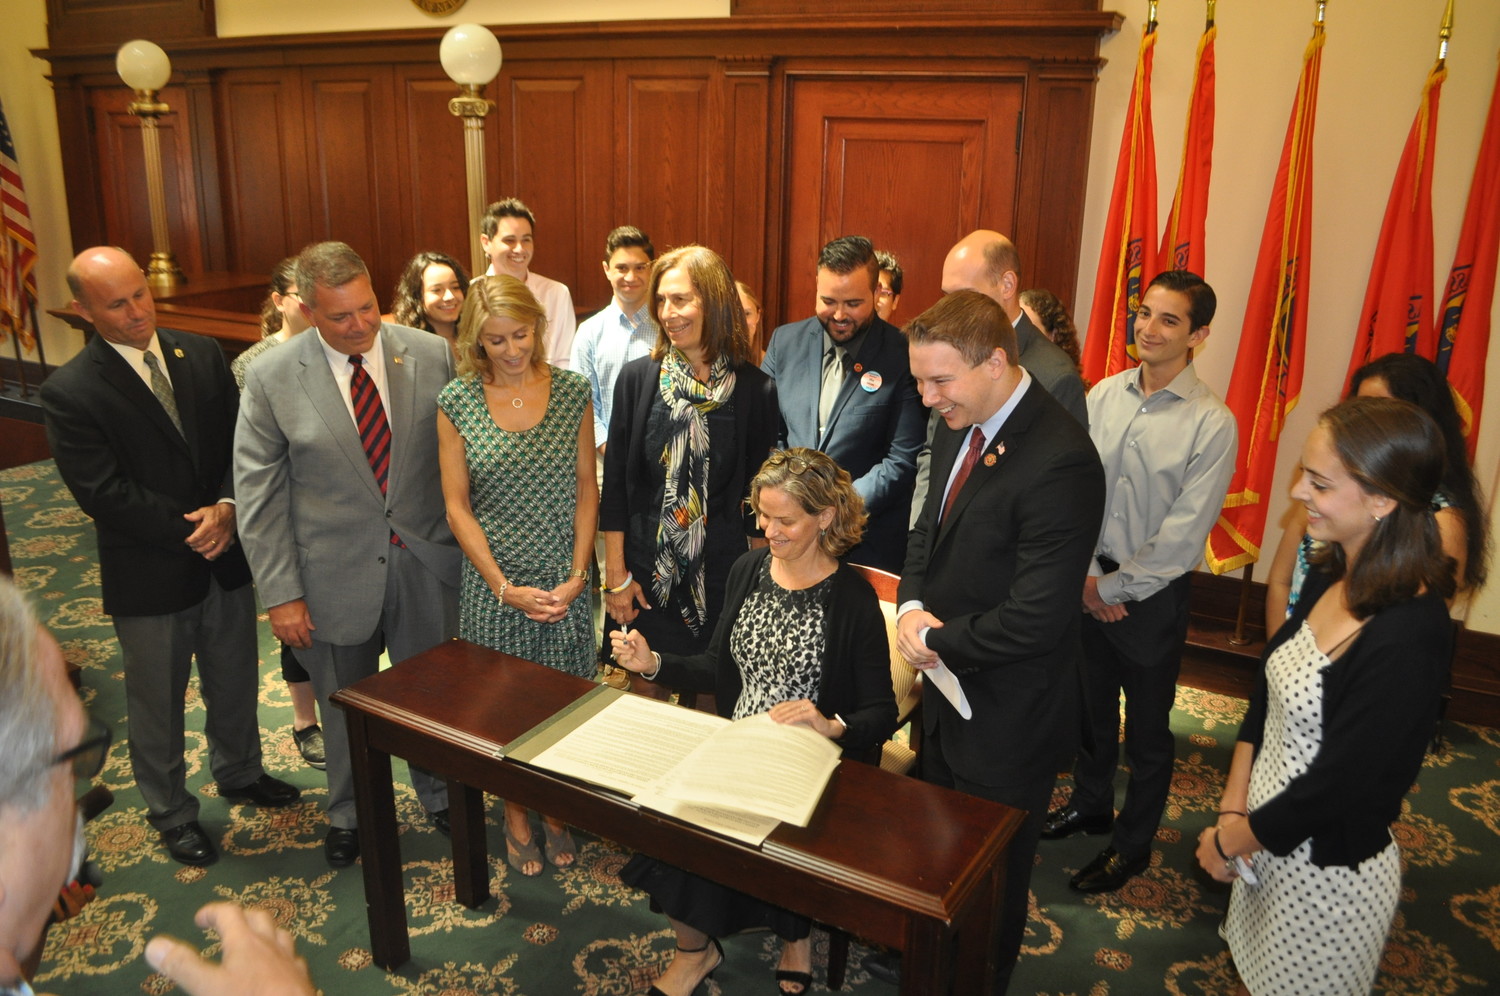 County Executive Laura Curran signed an anti-bullying bill authored by Legislator Josh Lafazan, to her left, surrounded by students and stakeholder organizations.